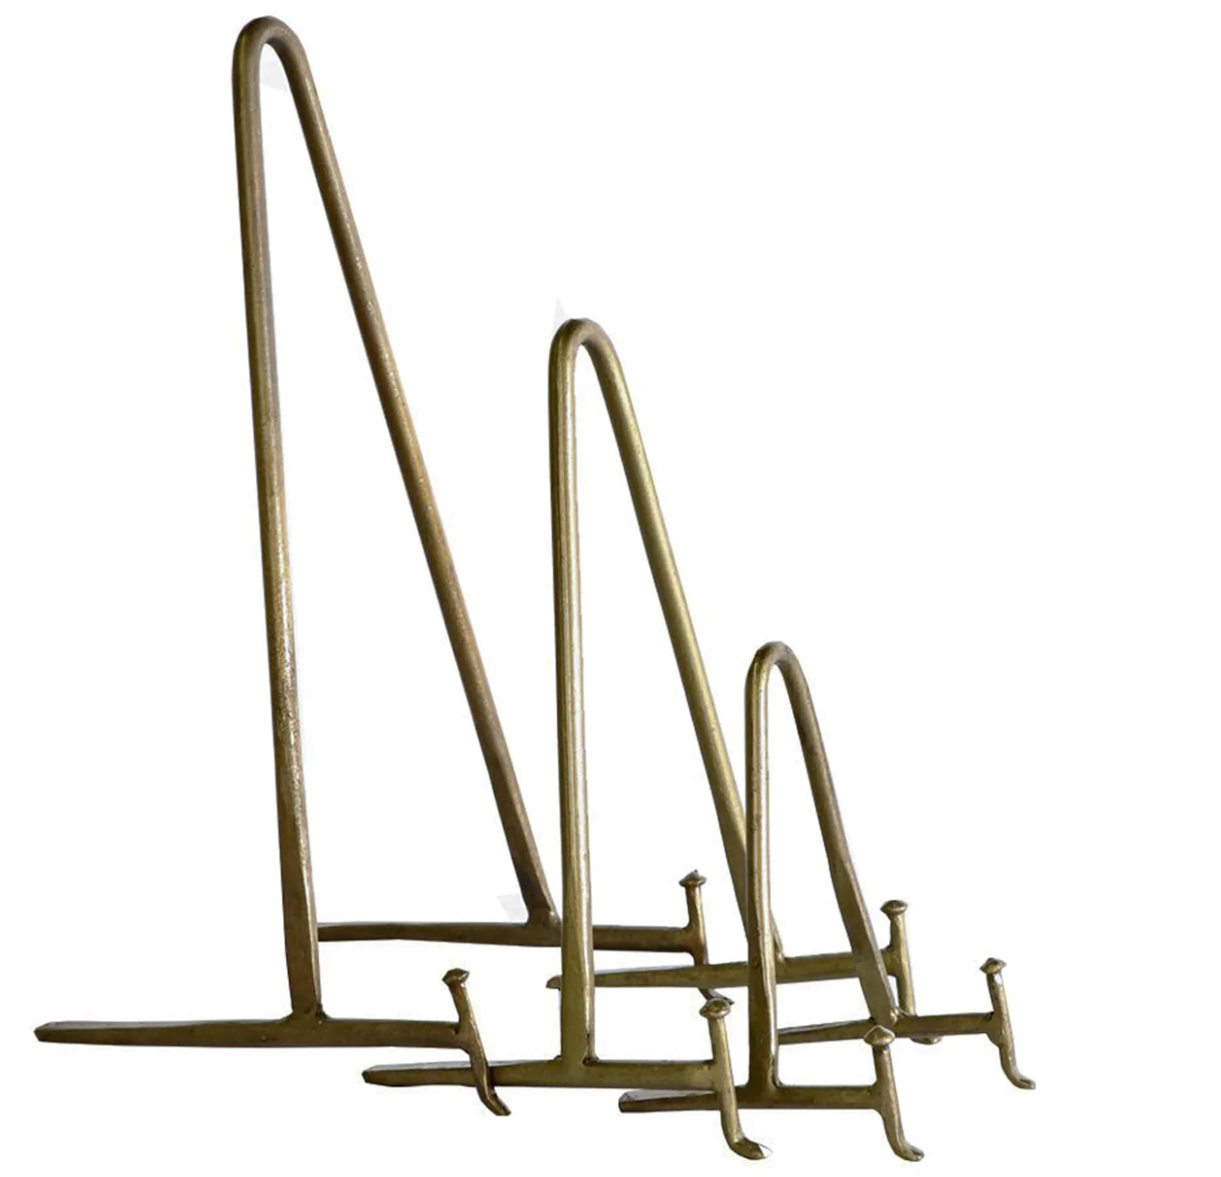 Antique Brass Stand - Medium: Medium-sized antique brass stand from Grace Blu Shoppe featuring an elegant design to showcase your treasured pieces.